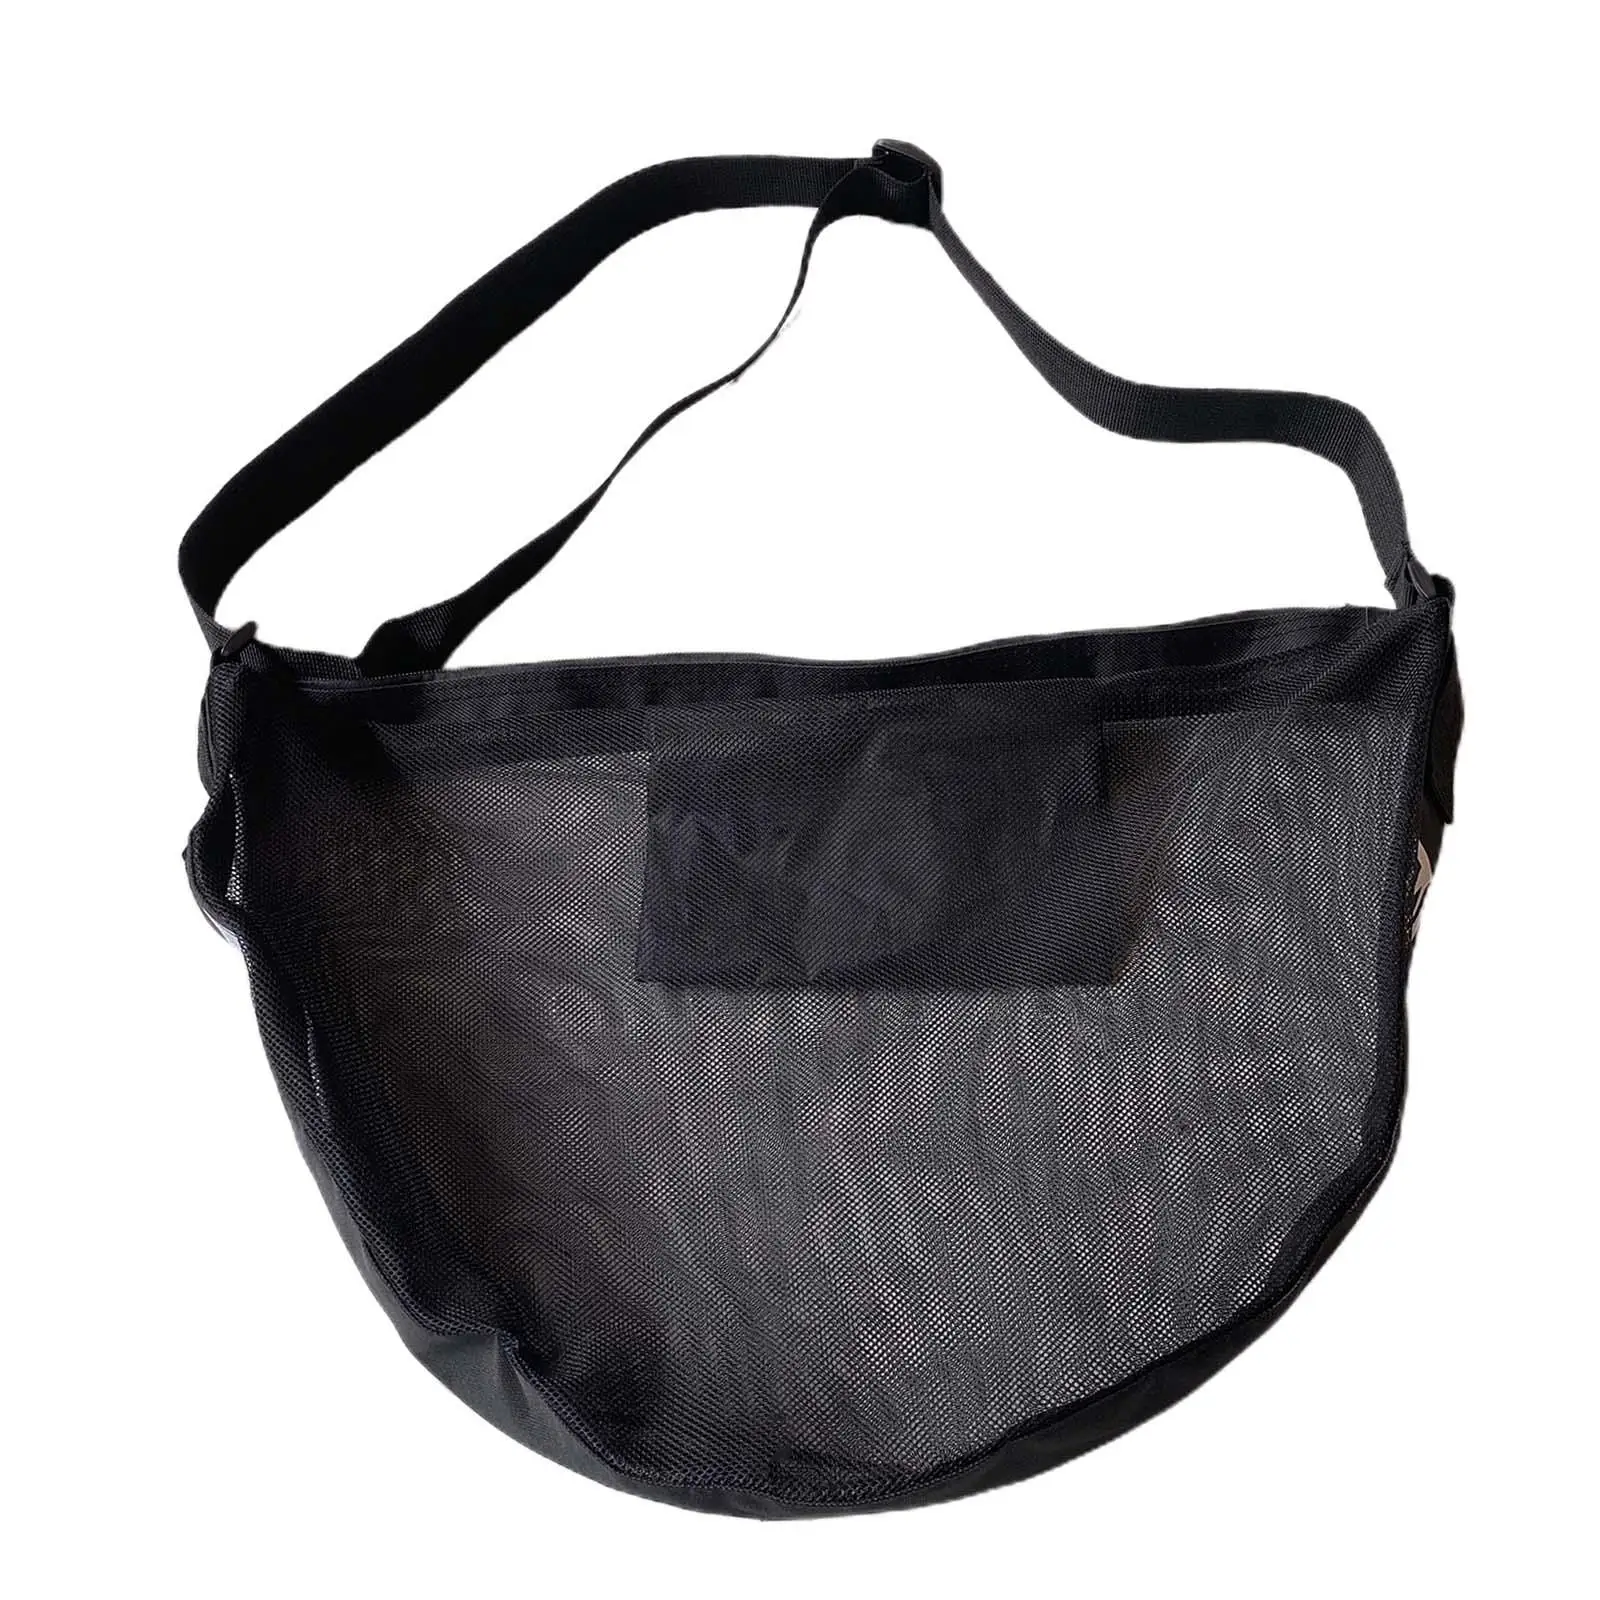 Ball Bags Mesh with Shoulder Strap Equipment Lightweight Basketball Carry Bag for Garage Outdoor Sports Training Soccer Exercise